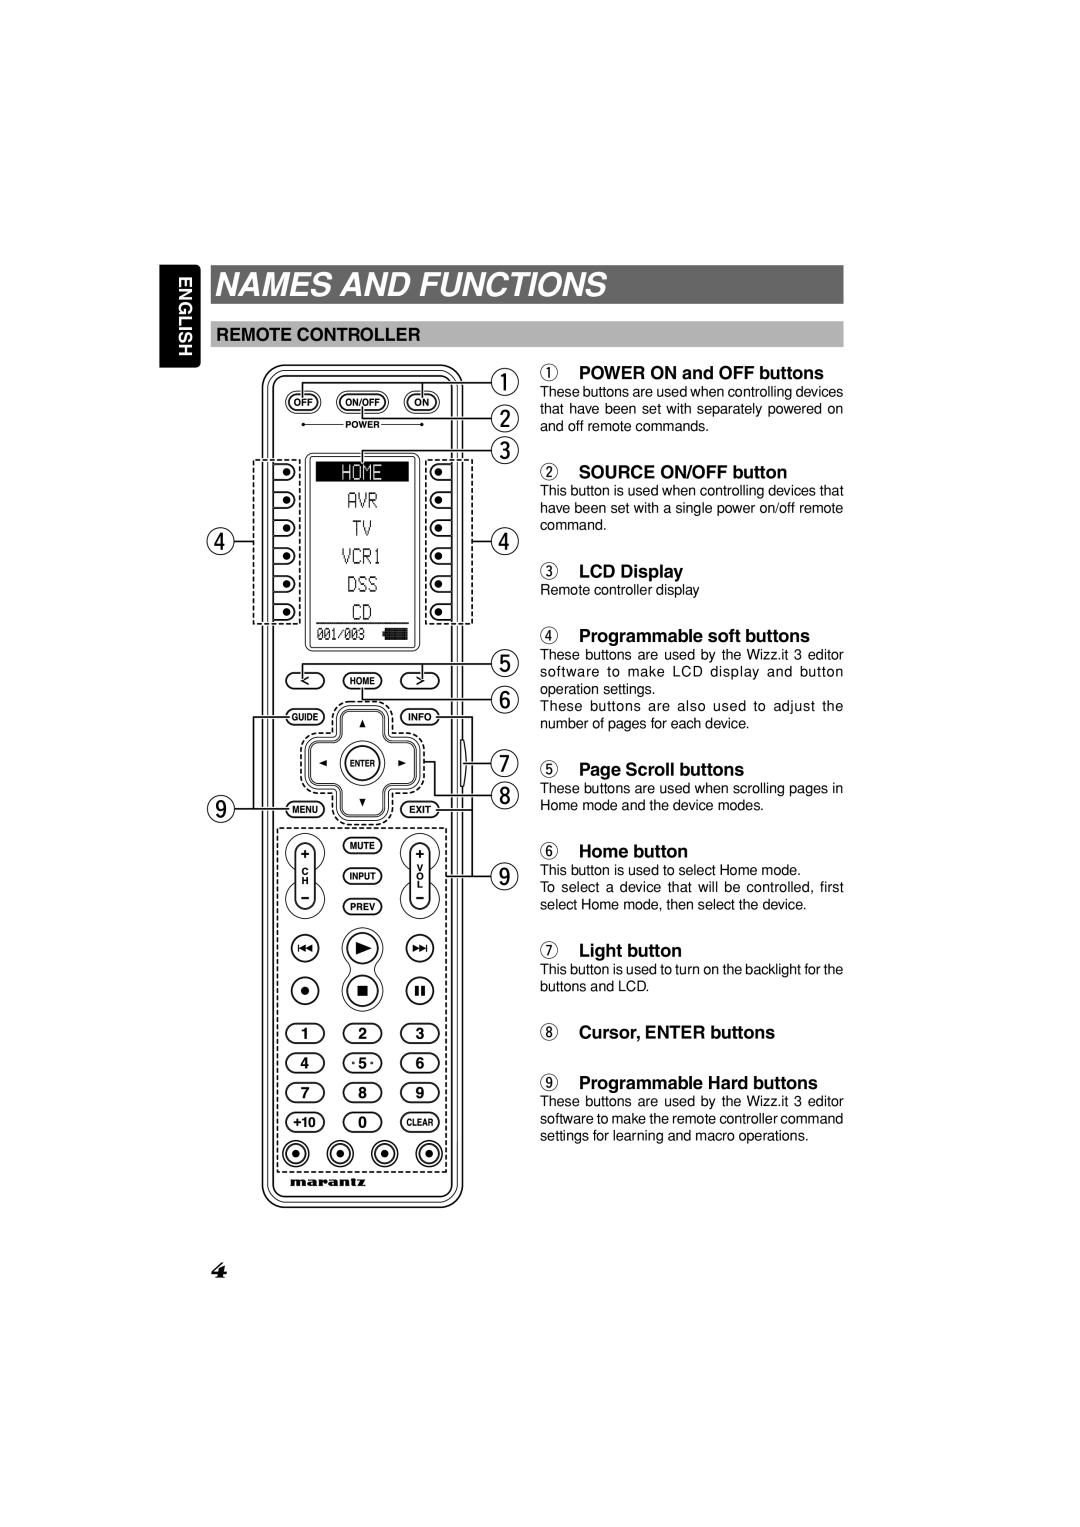 Marantz RC2001 manual Names and Functions, Remote Controller, Remote controller display, Home mode and the device modes 